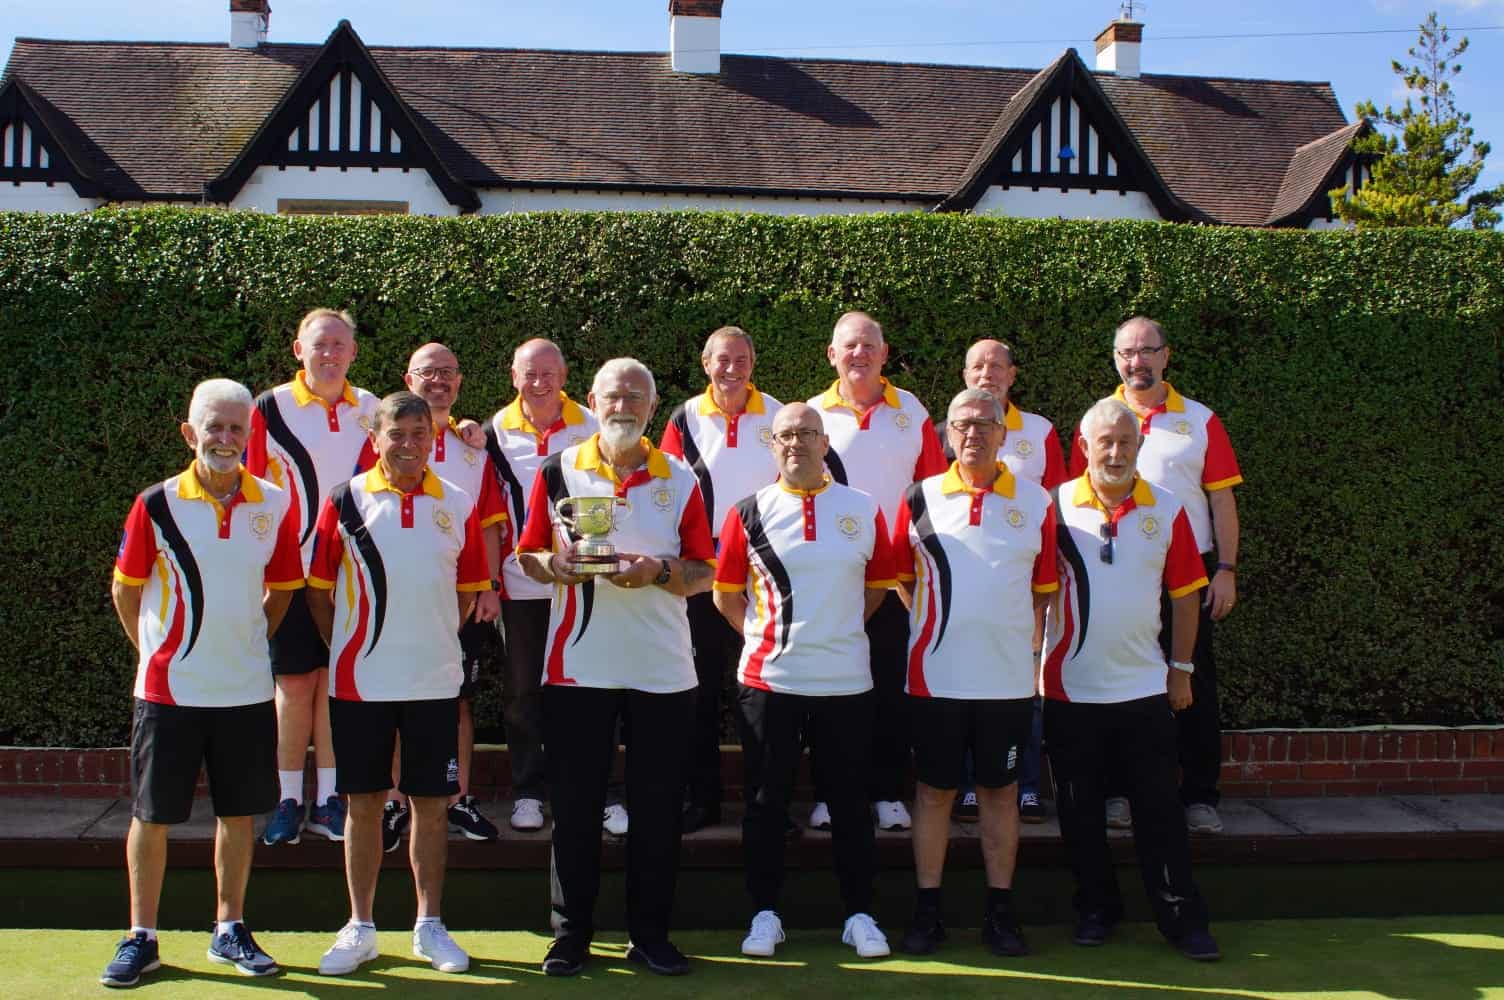 Image of Kingsthorpe Bowling Club team who won the inaugural Northamptonshire County Top Club Competition played at Abington Bowling Club in 2022